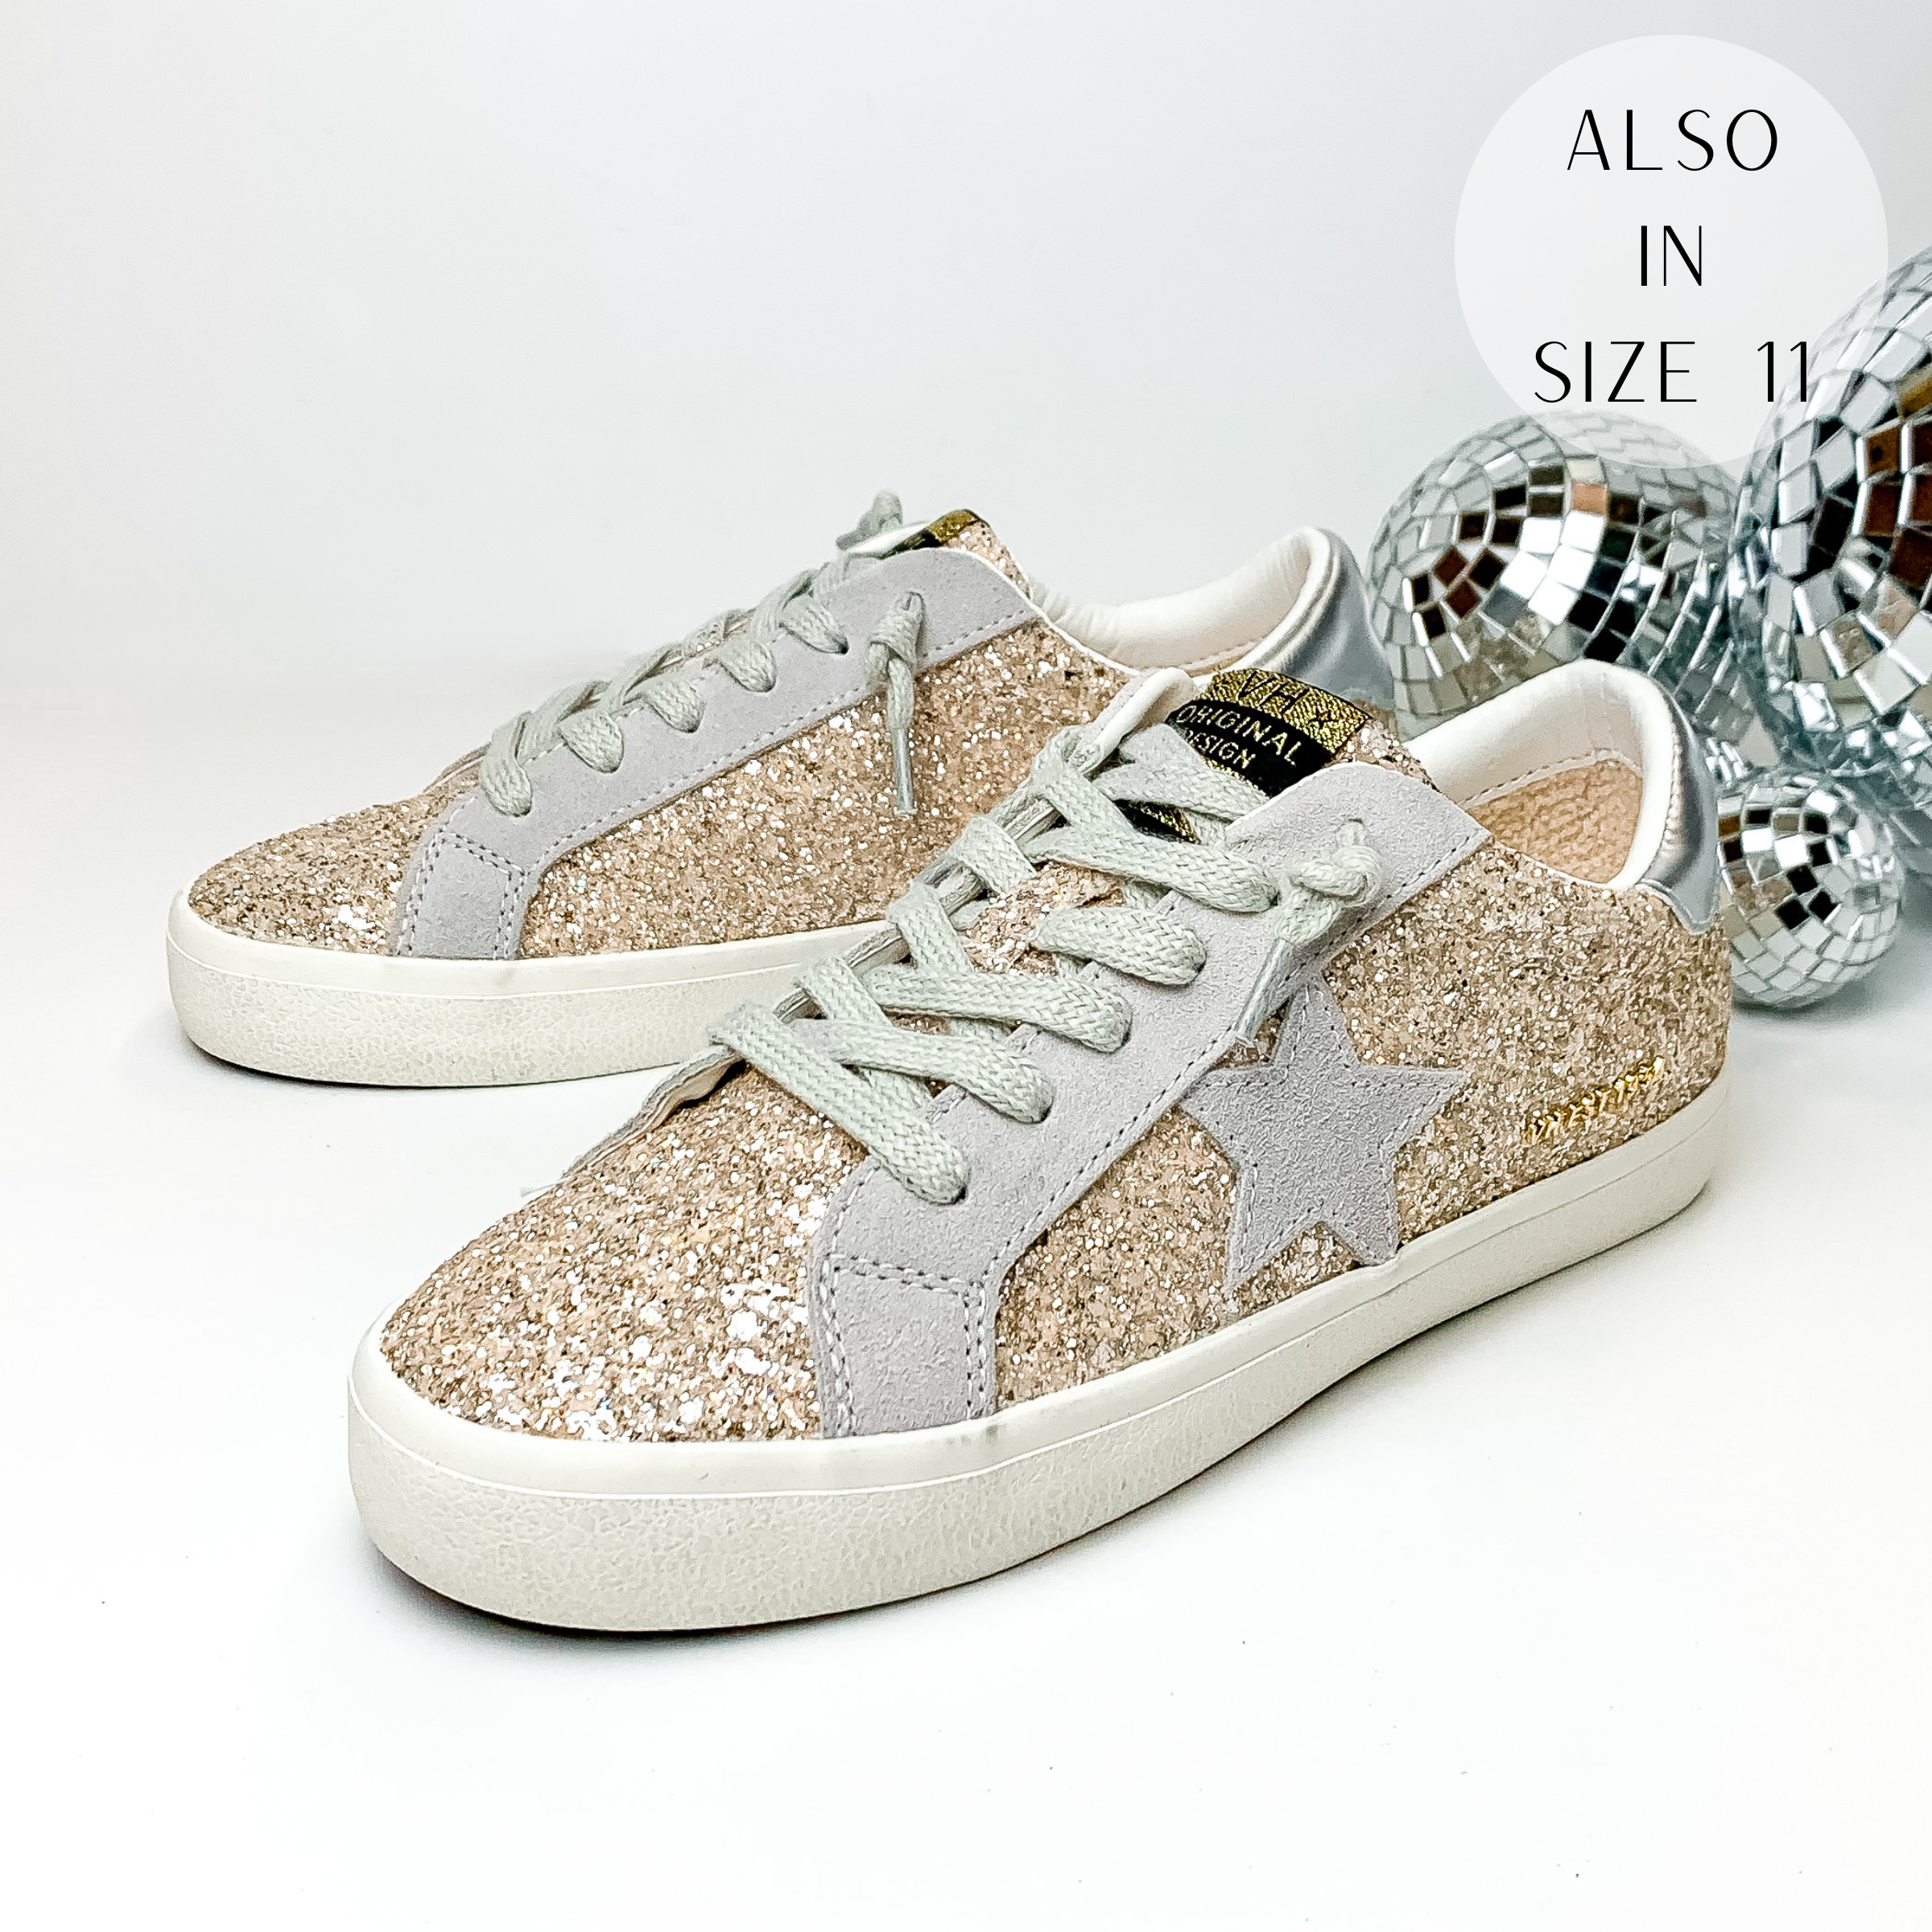 Pictured are tennis shoes with a champagne glitter inlay with light grey accents. These shoes also include a metallic silver patch on the heel and they have a light grey star emblem on the side of the shoe. These shoes are pictured on a white background with disco balls behind them on the right hand side.